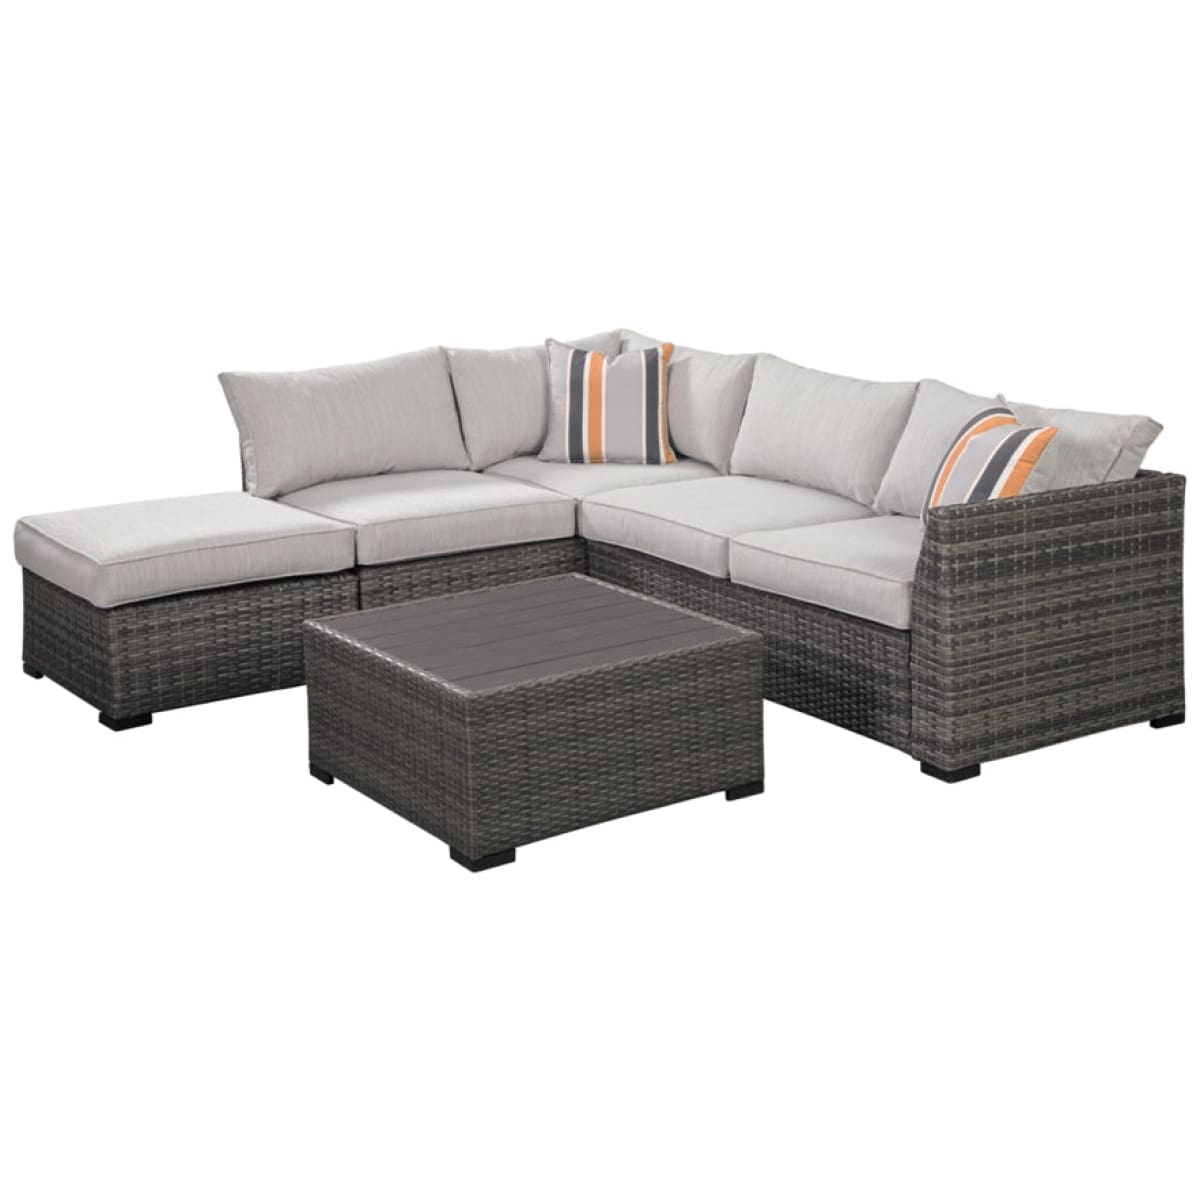 Cherry Point 4-piece Outdoor Sectional Set - 90 W x 85.5 D x 31.5 H - Outdoor Sofa